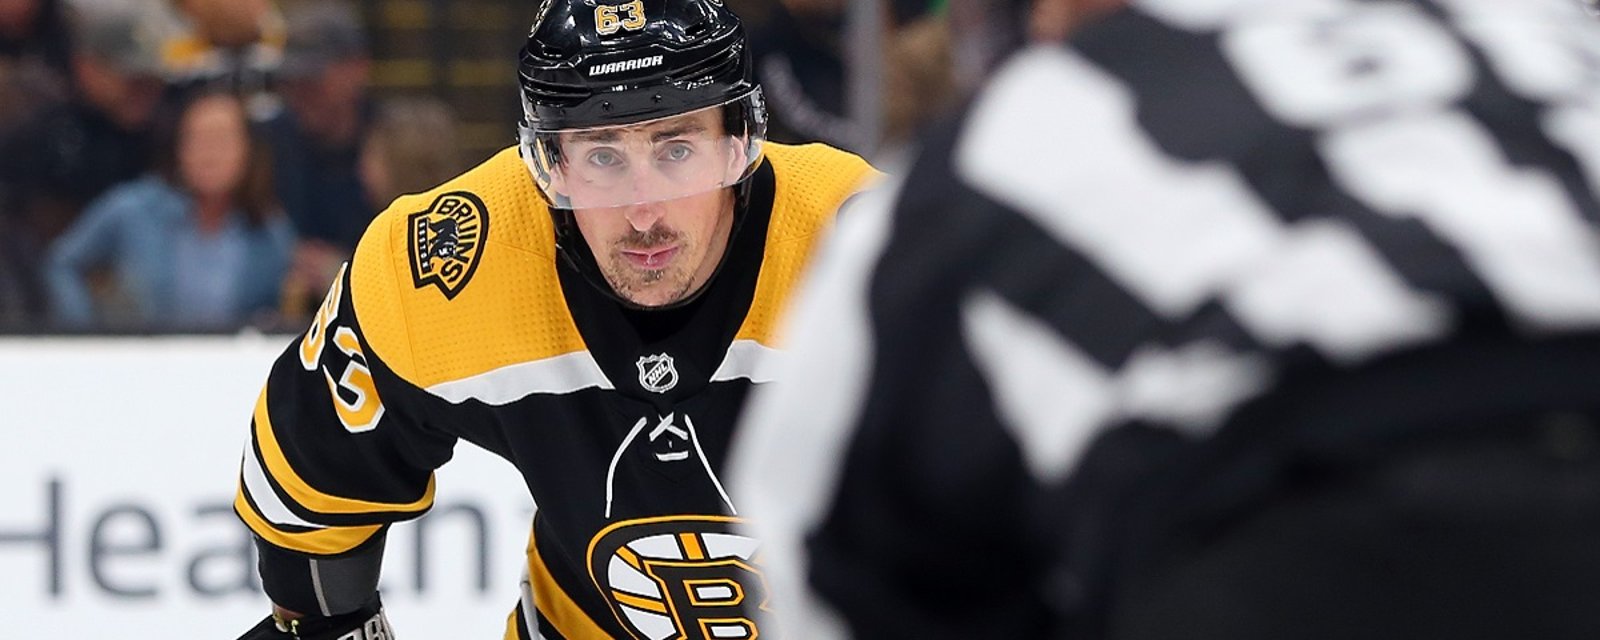 Brad Marchand ignored in the NHL's All Star selection.